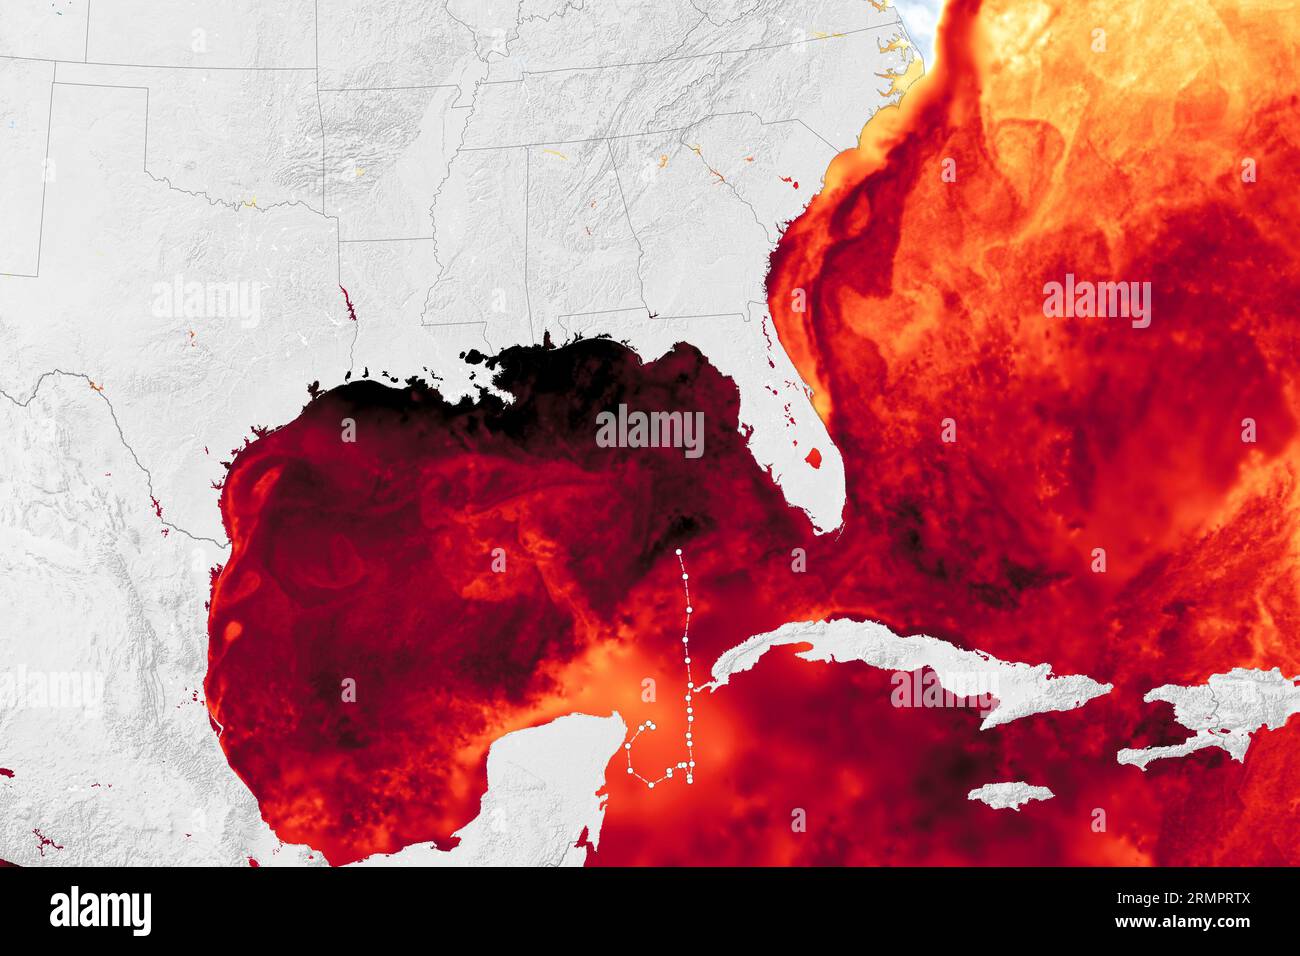 Florida, USA. 29th Aug, 2023. Idalia strengthened into a hurricane Tuesday and barreled toward Florida's Gulf Coast as authorities warned residents of vulnerable areas to pack up and leave to escape the twin threats of high winds and devastating flooding. August 27 based on data from the Multiscale Ultrahigh Resolution Sea Surface Temperature (MUR SST) project, a NASA Jet Propulsion Laboratory effort that blends measurements of sea surface temperatures from multiple NASA, NOAA, and international satellites, as well as ship and buoy observations. (Credit Image: © NOAA/ZUMA Press Wire/ZUMAPRESS Stock Photo